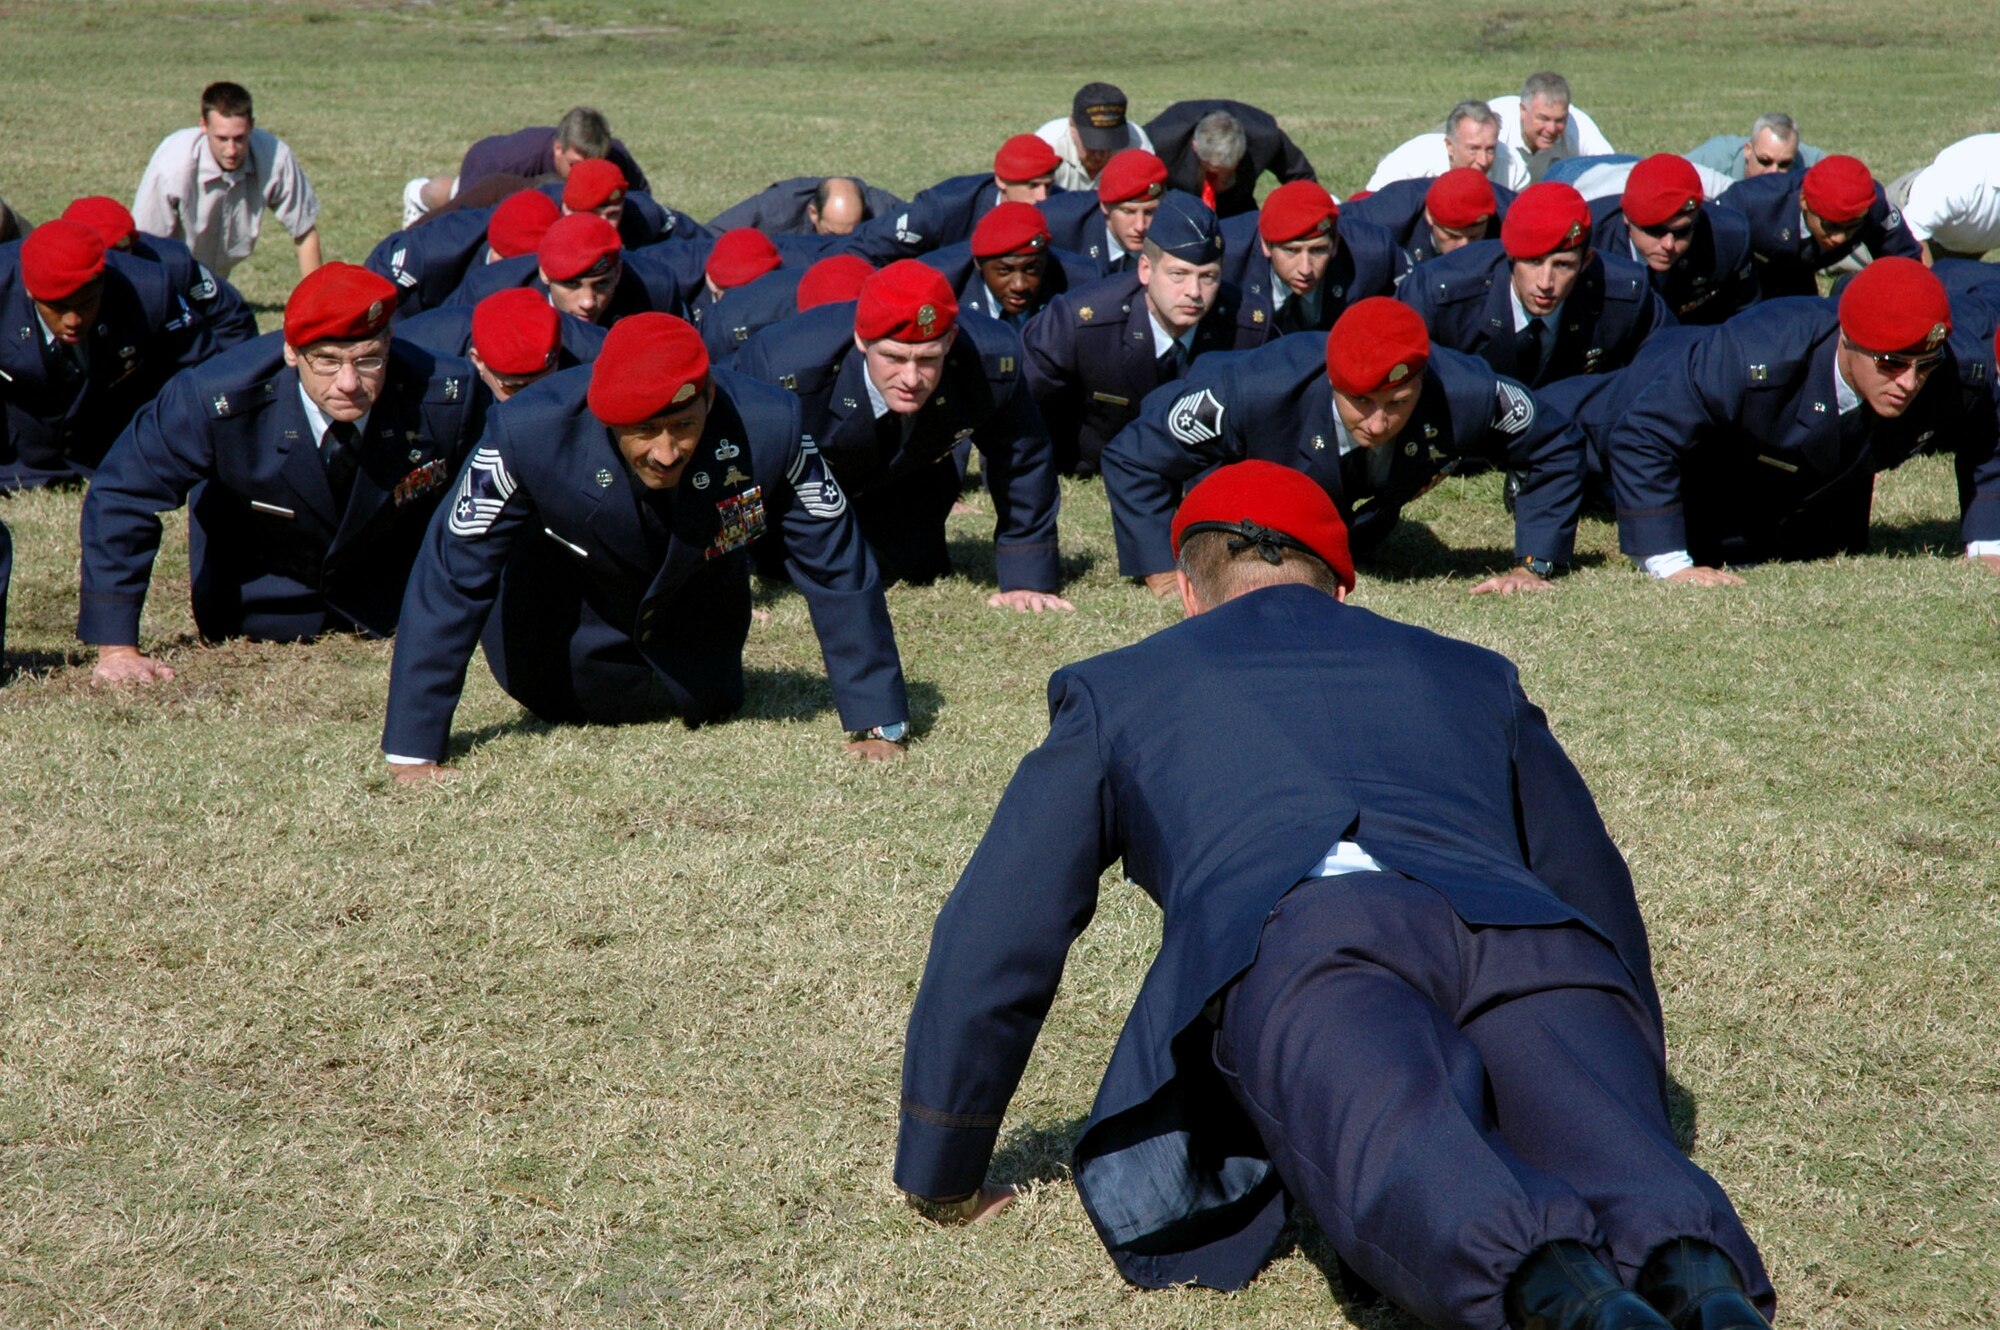 Col. Marc Stratton leads a flight of current and retired combat controllers in memorial push-ups during the Annual Combat Control Association reunion and memorial service Nov. 3 at Hurlburt Field, Fla. More than 100 people gathered for the ceremony to honor their fallen comrades. Colonel Stratton is the 720th Special Tactics Group commander. (U.S. Air Force photo/Dawn Hart)
